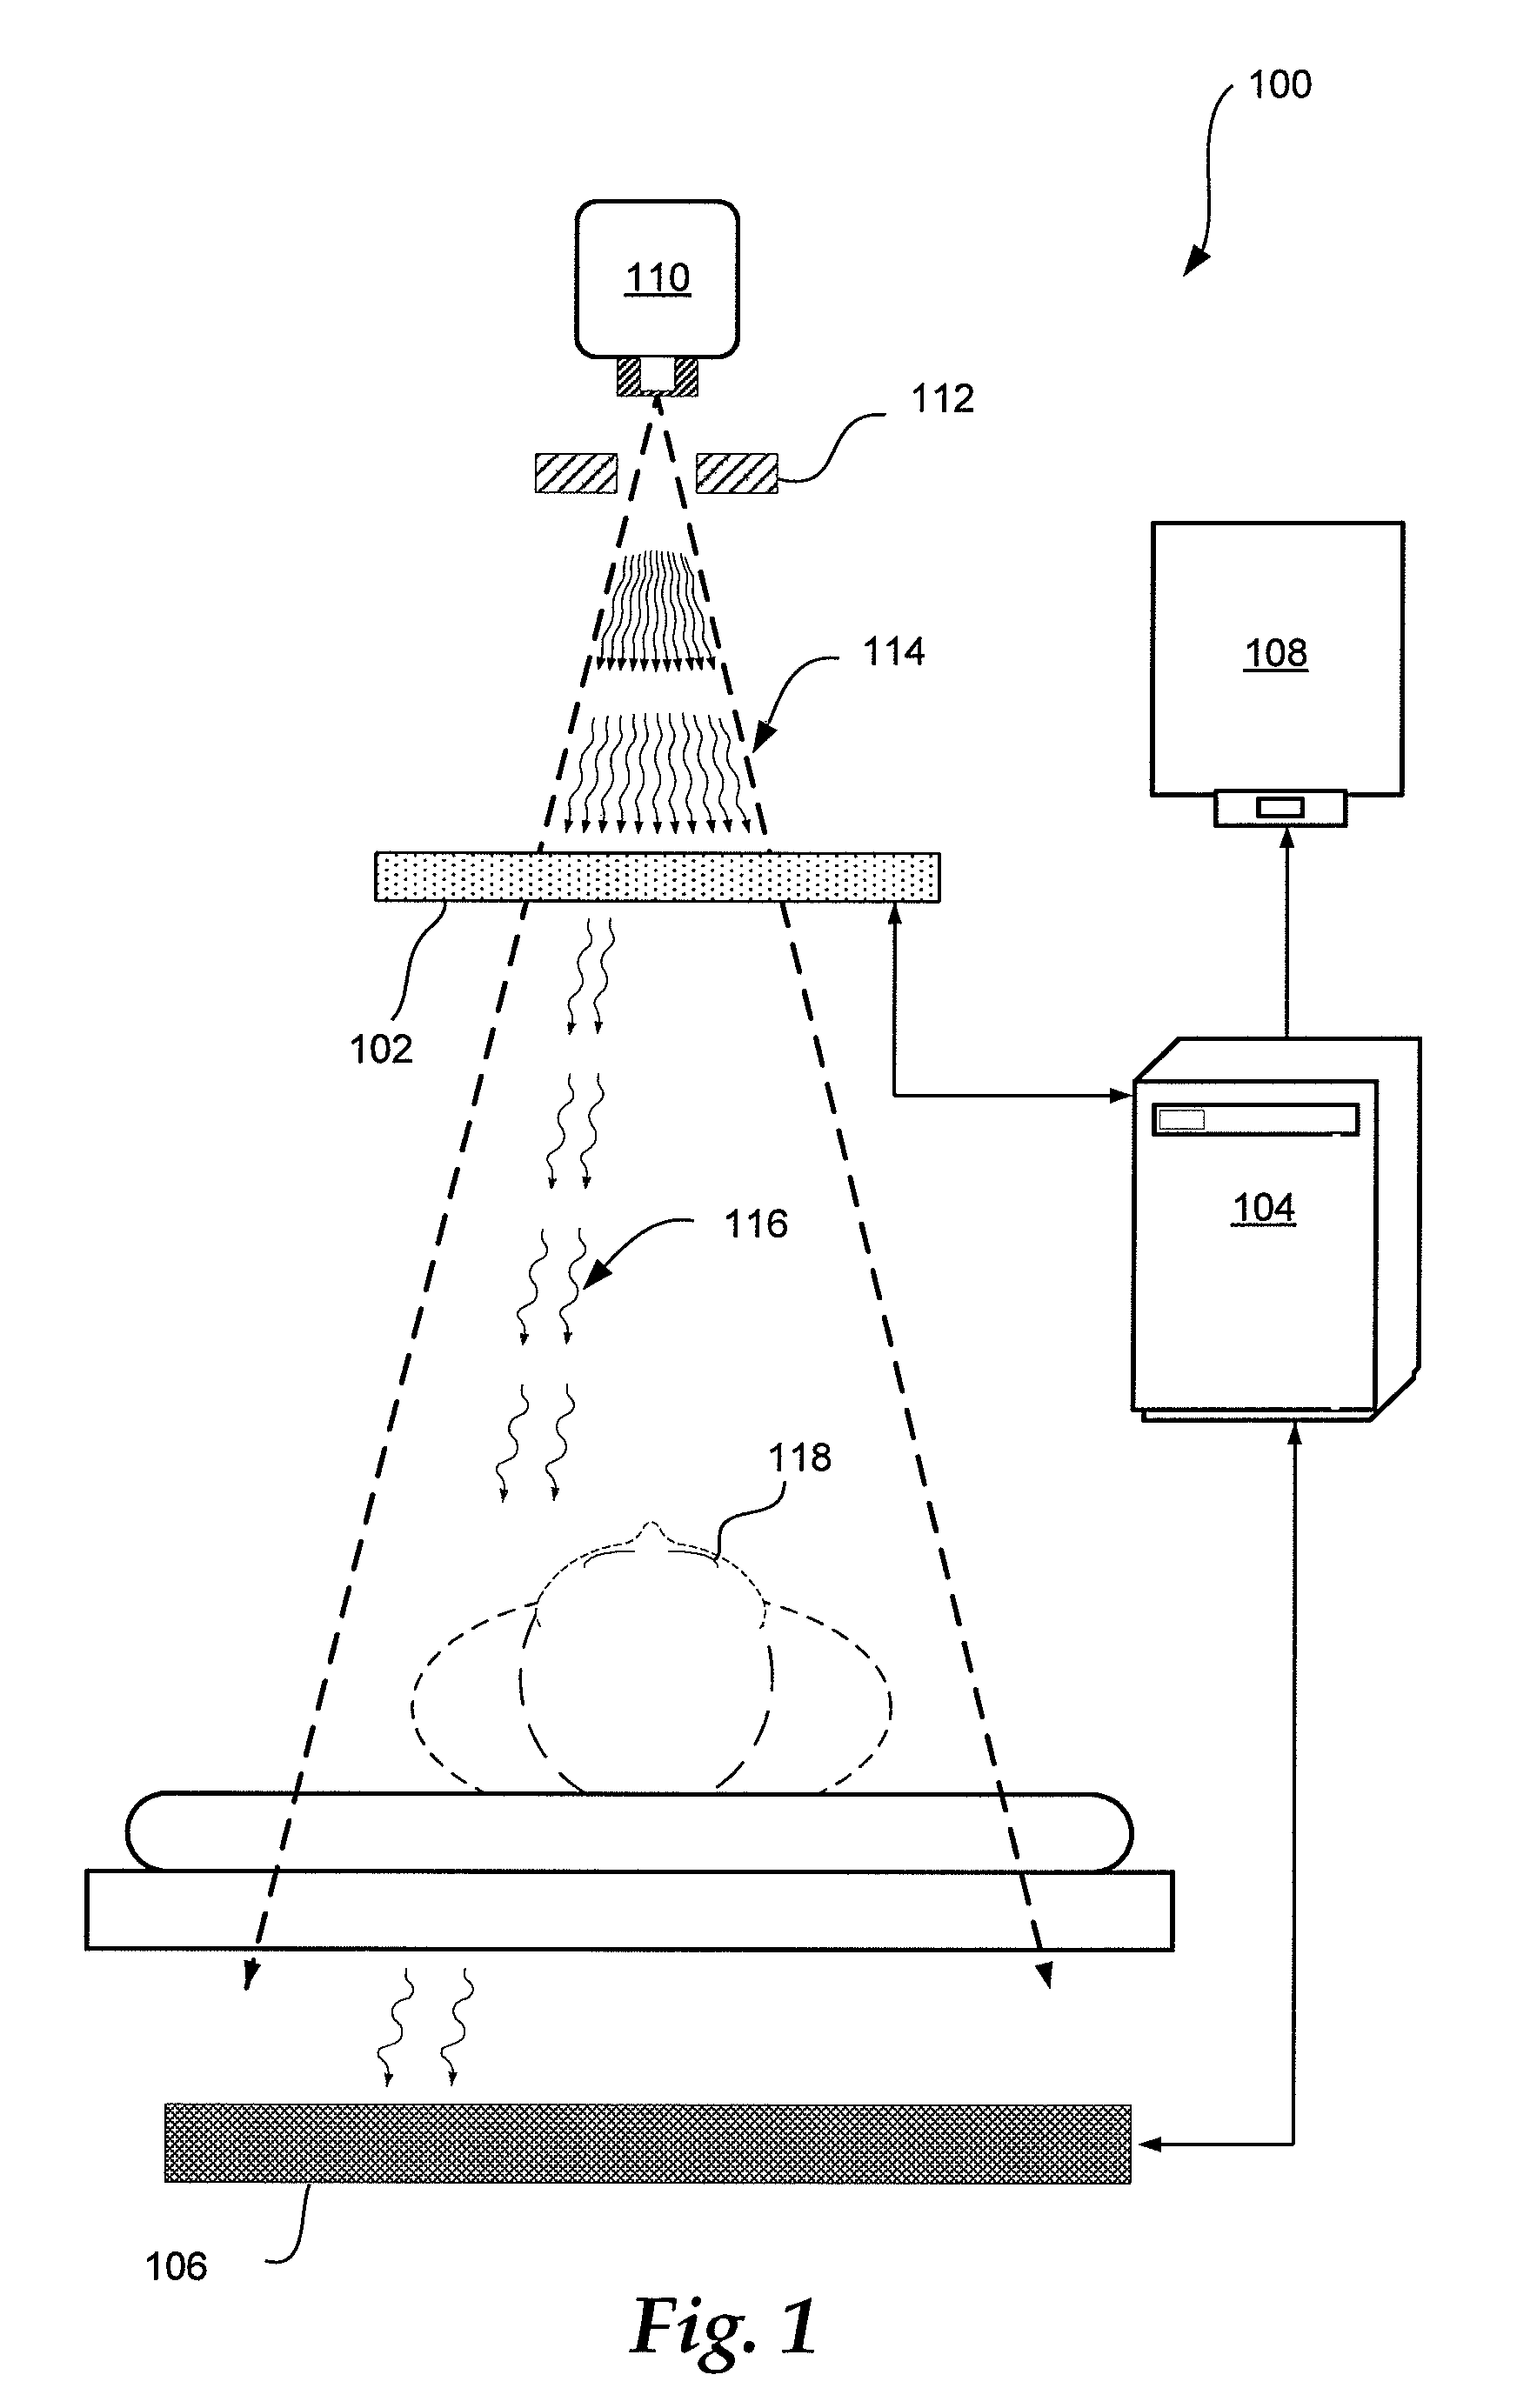 Radiation attenuation device and method includes radiation attenuating fluid and directly communicating adjacent chambers